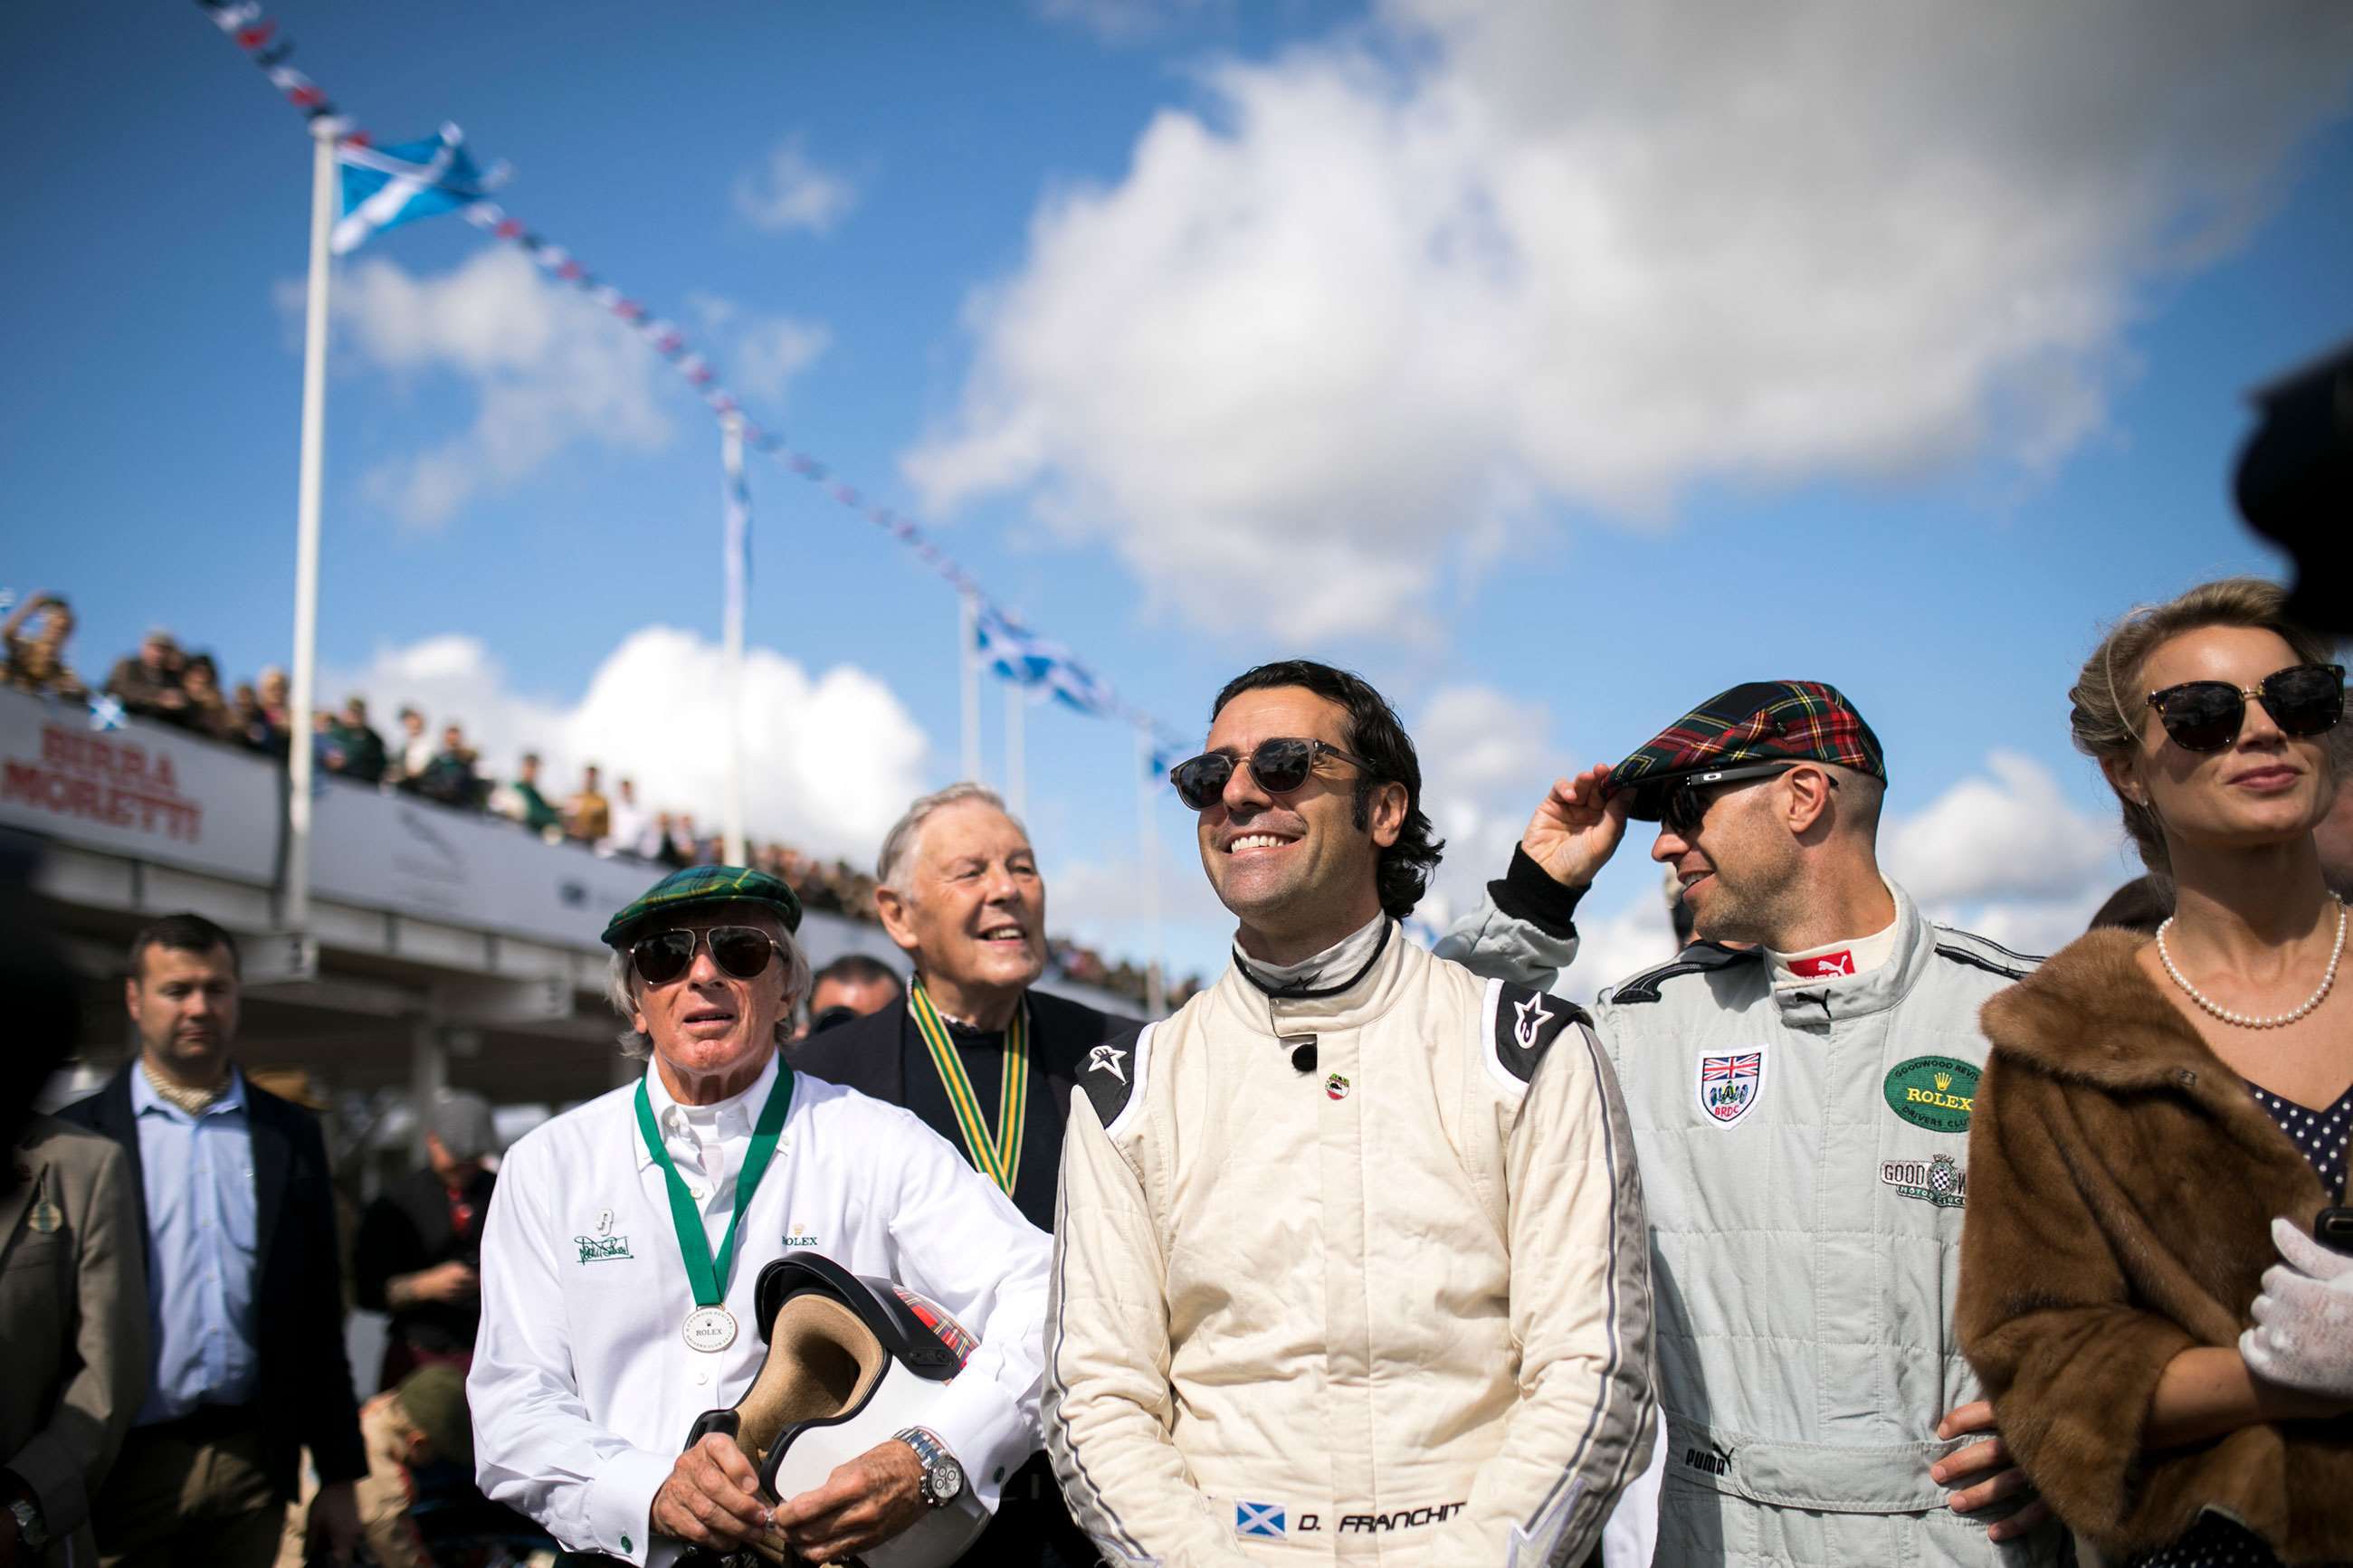 best-drivers-never-to-race-in-f1-2-dario-franchitti-revival-2017-nicole-hains-goodwood-26052020.jpg